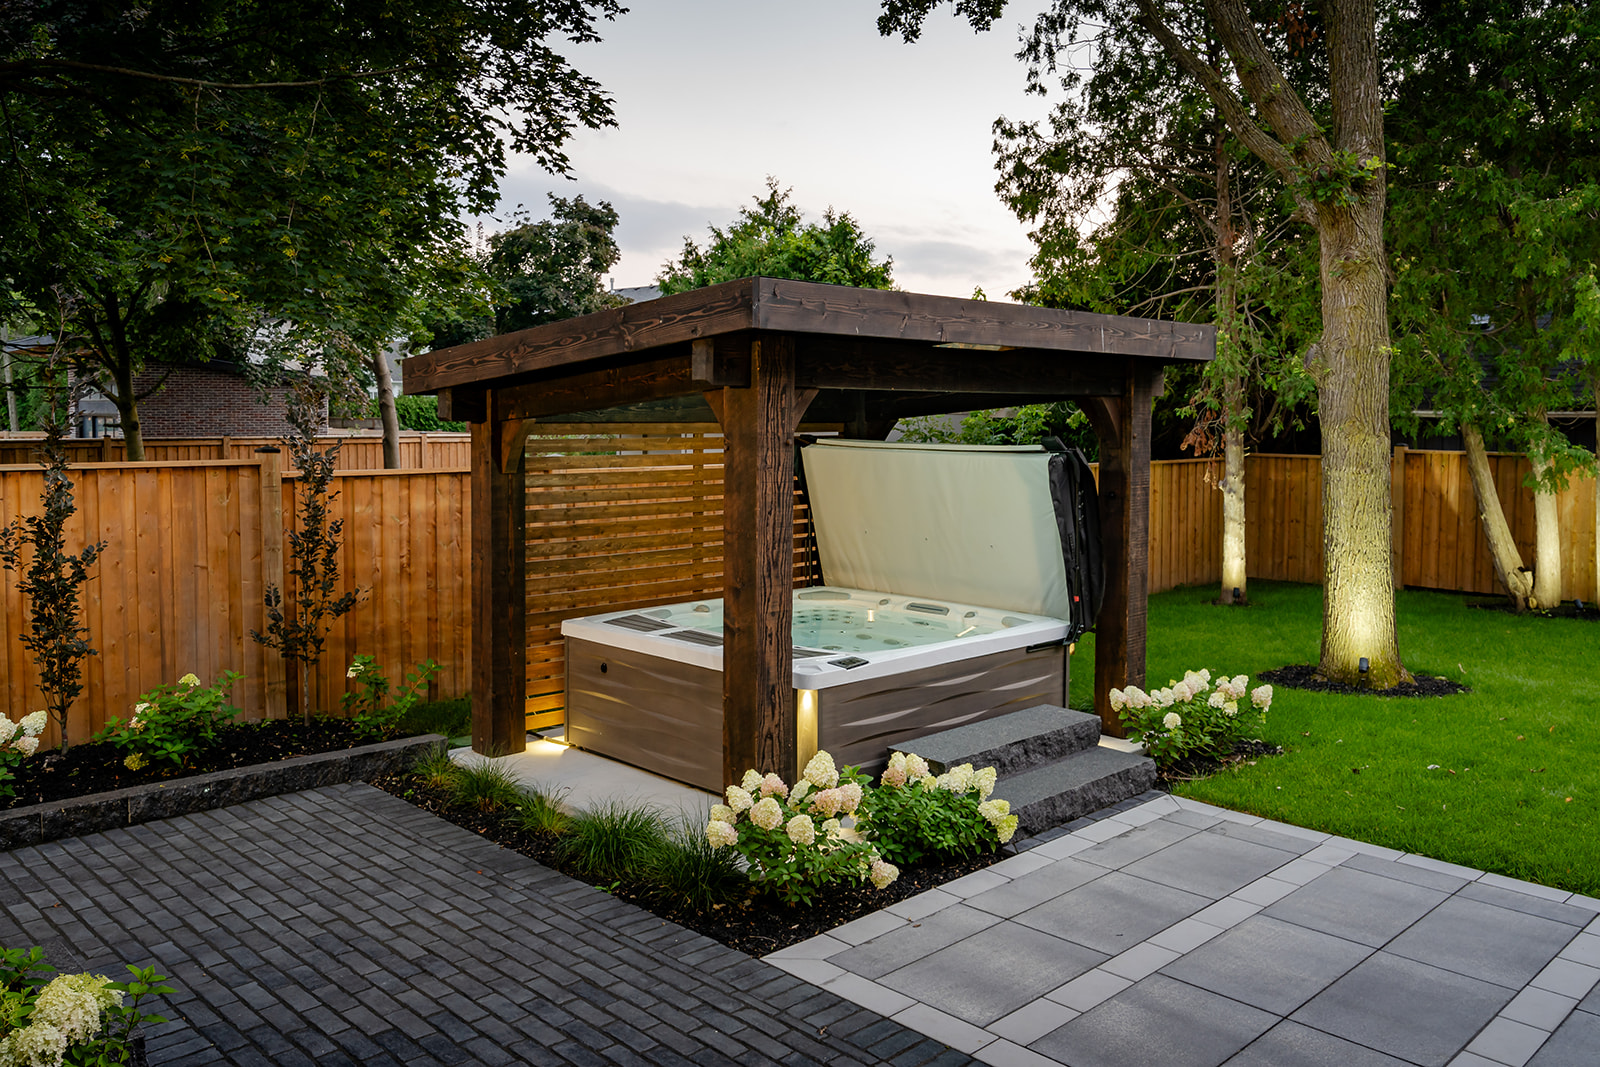 An open jacuzzi underneath a wooden canopy.